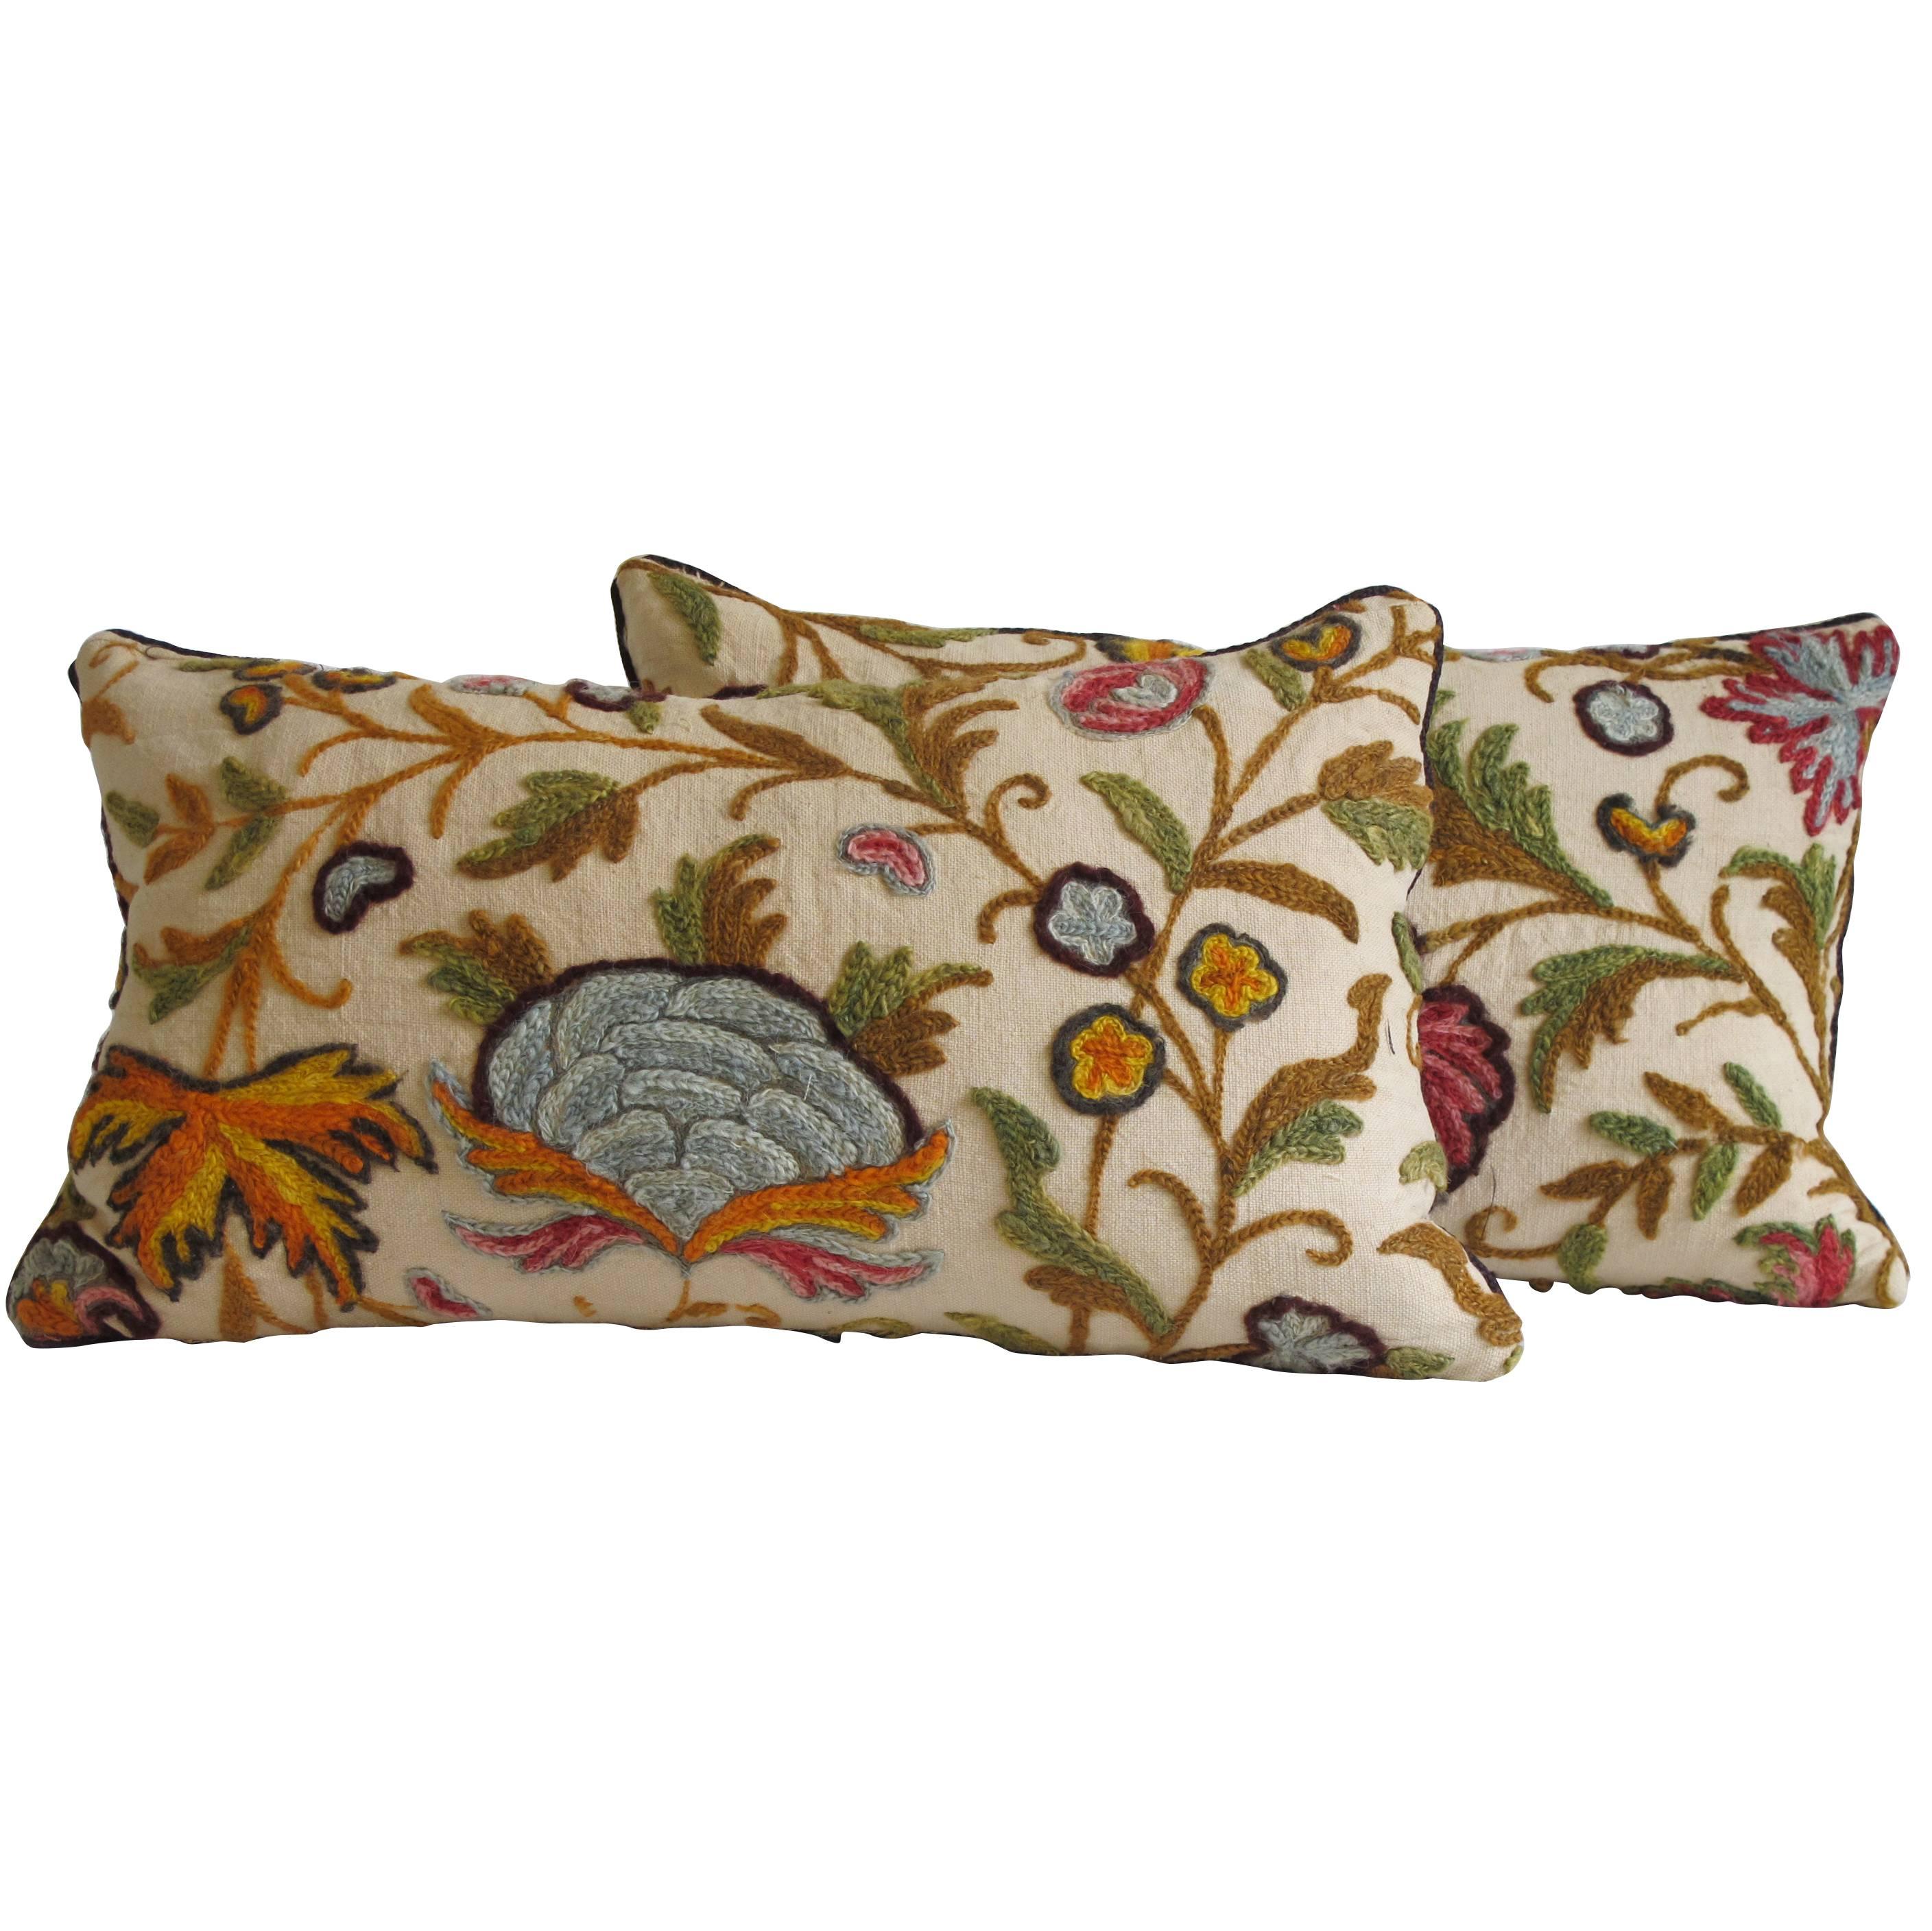 Vintage Crewel Pillows by Mary Jane McCarty